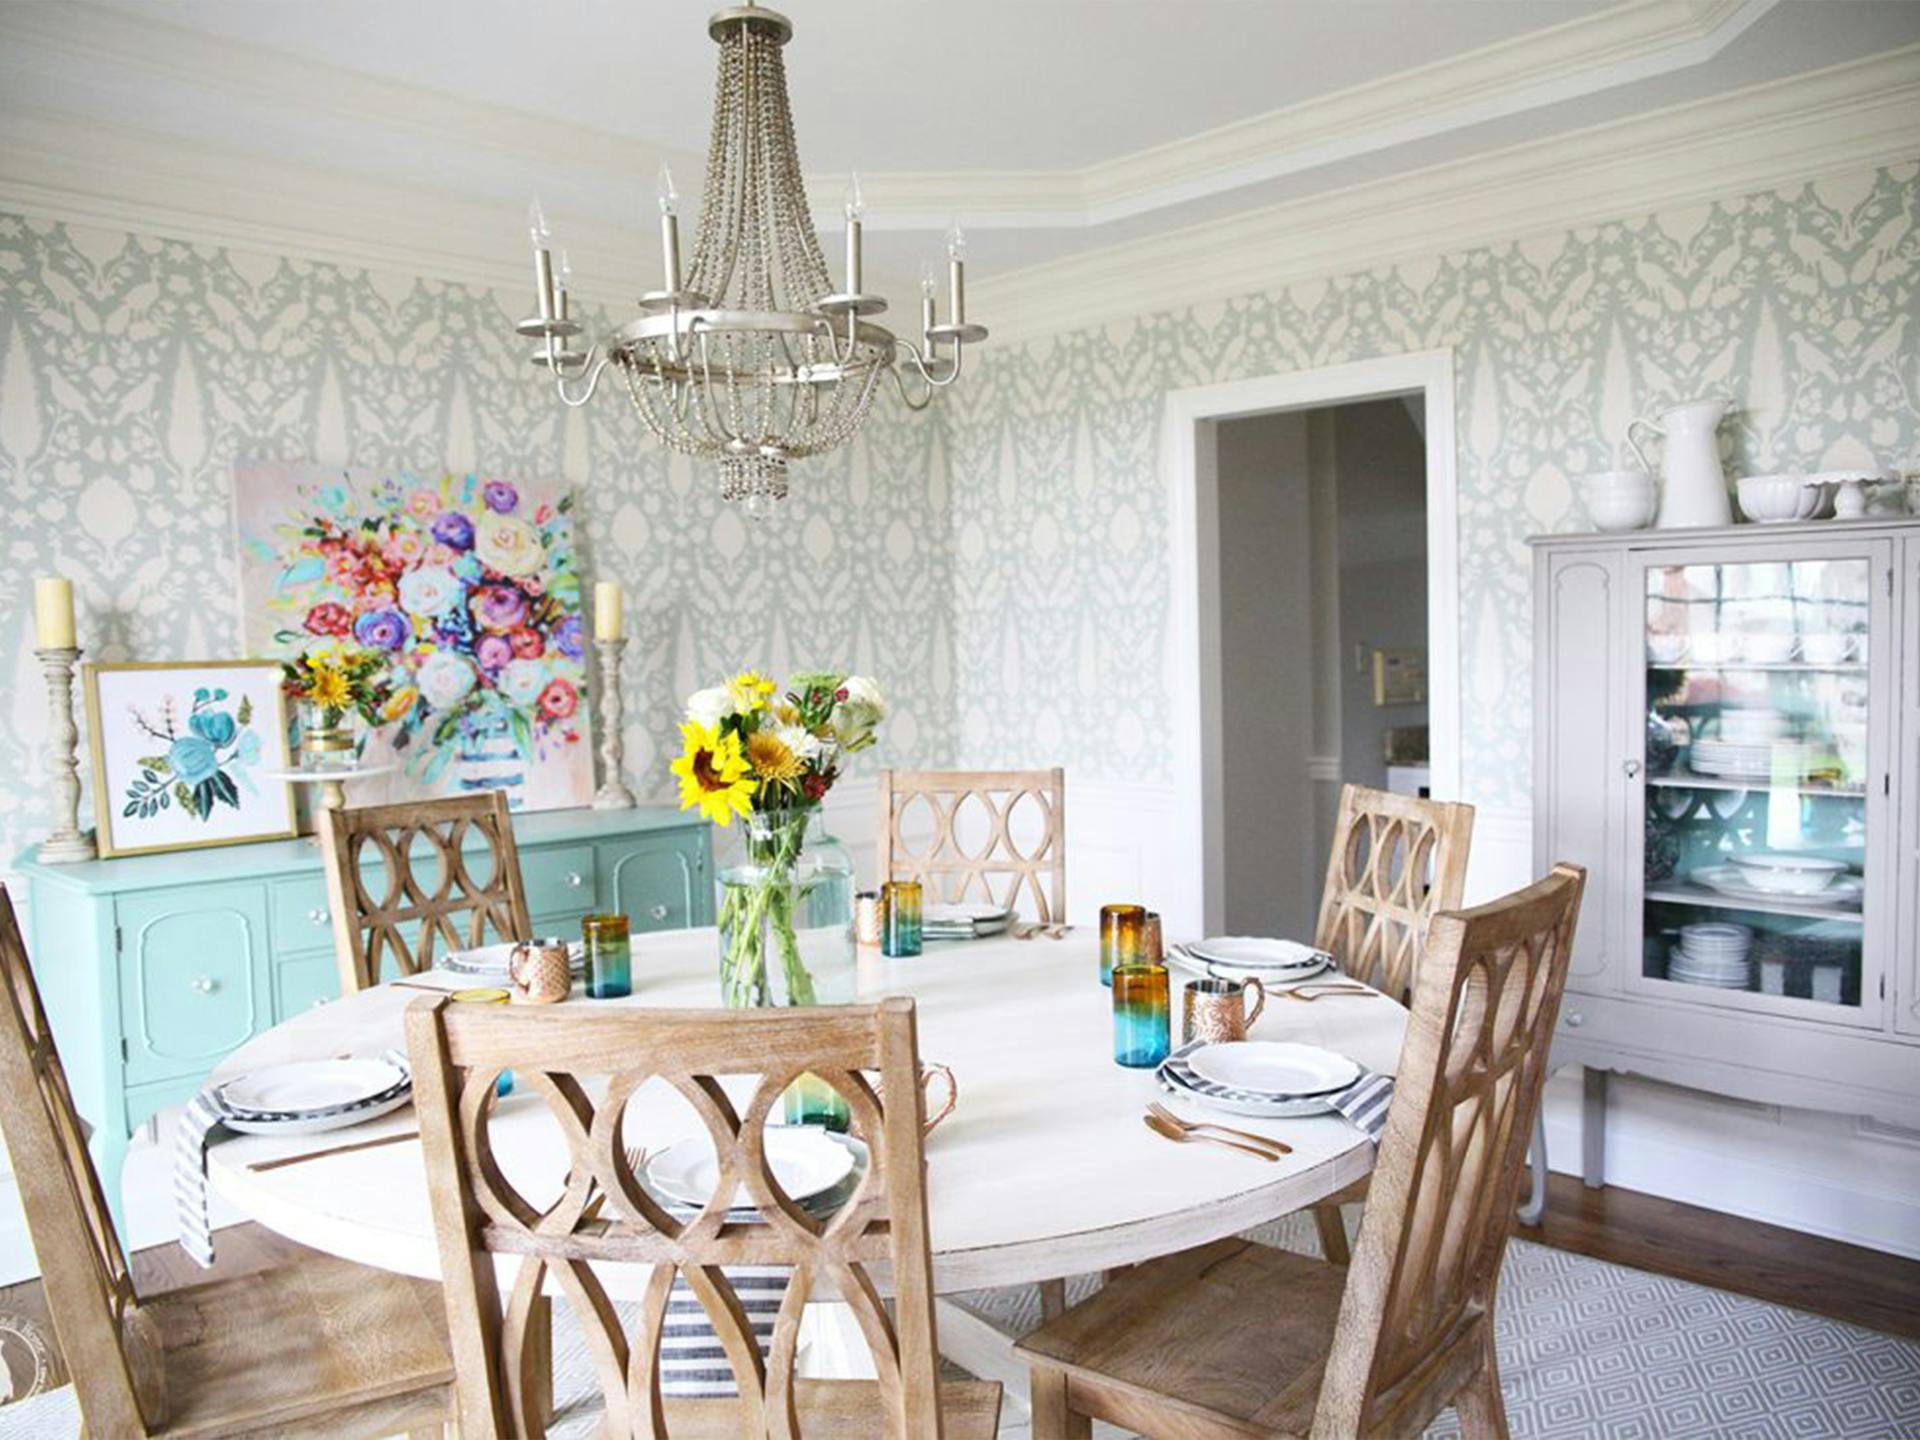 The Handmade Home's rustic summer dining room